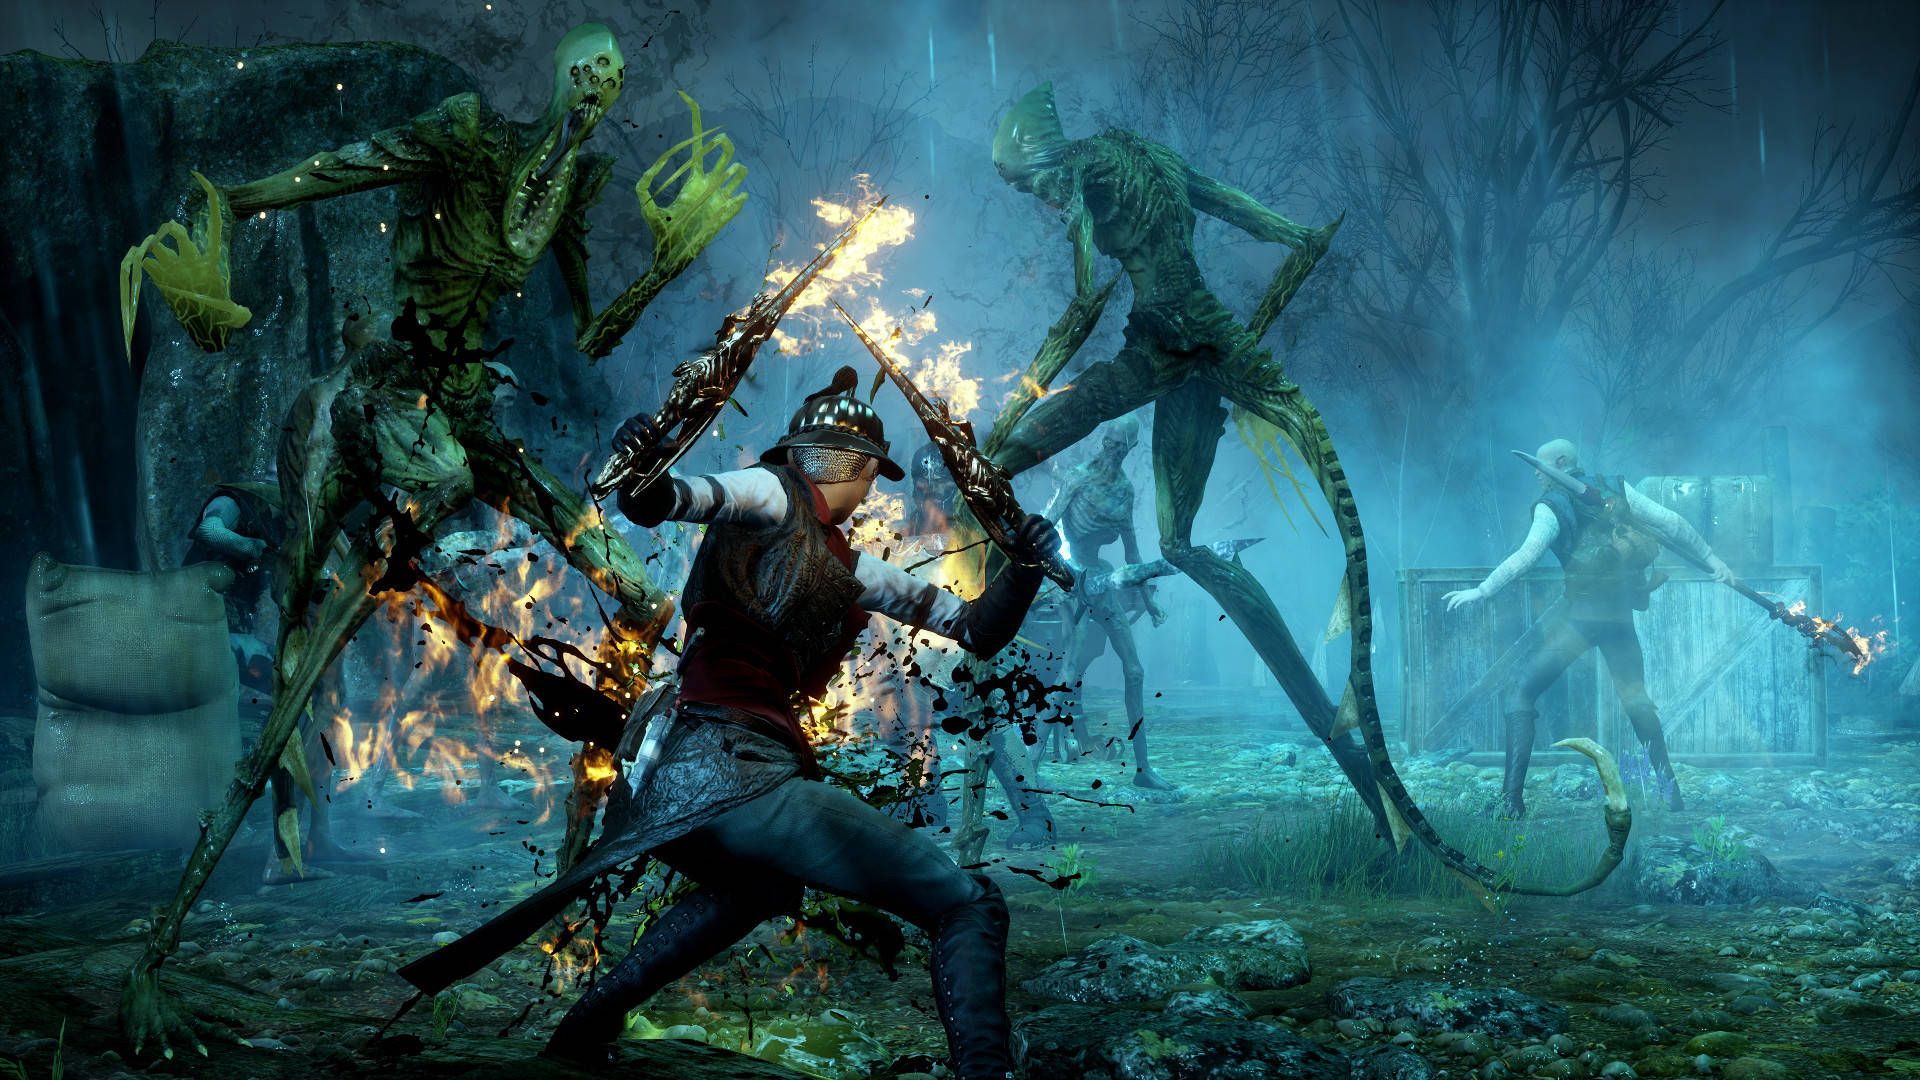 Best fantasy games: Dragon Age Inquisition. Image shows a warrior with a flaming sword fighting tall, strange creatures.